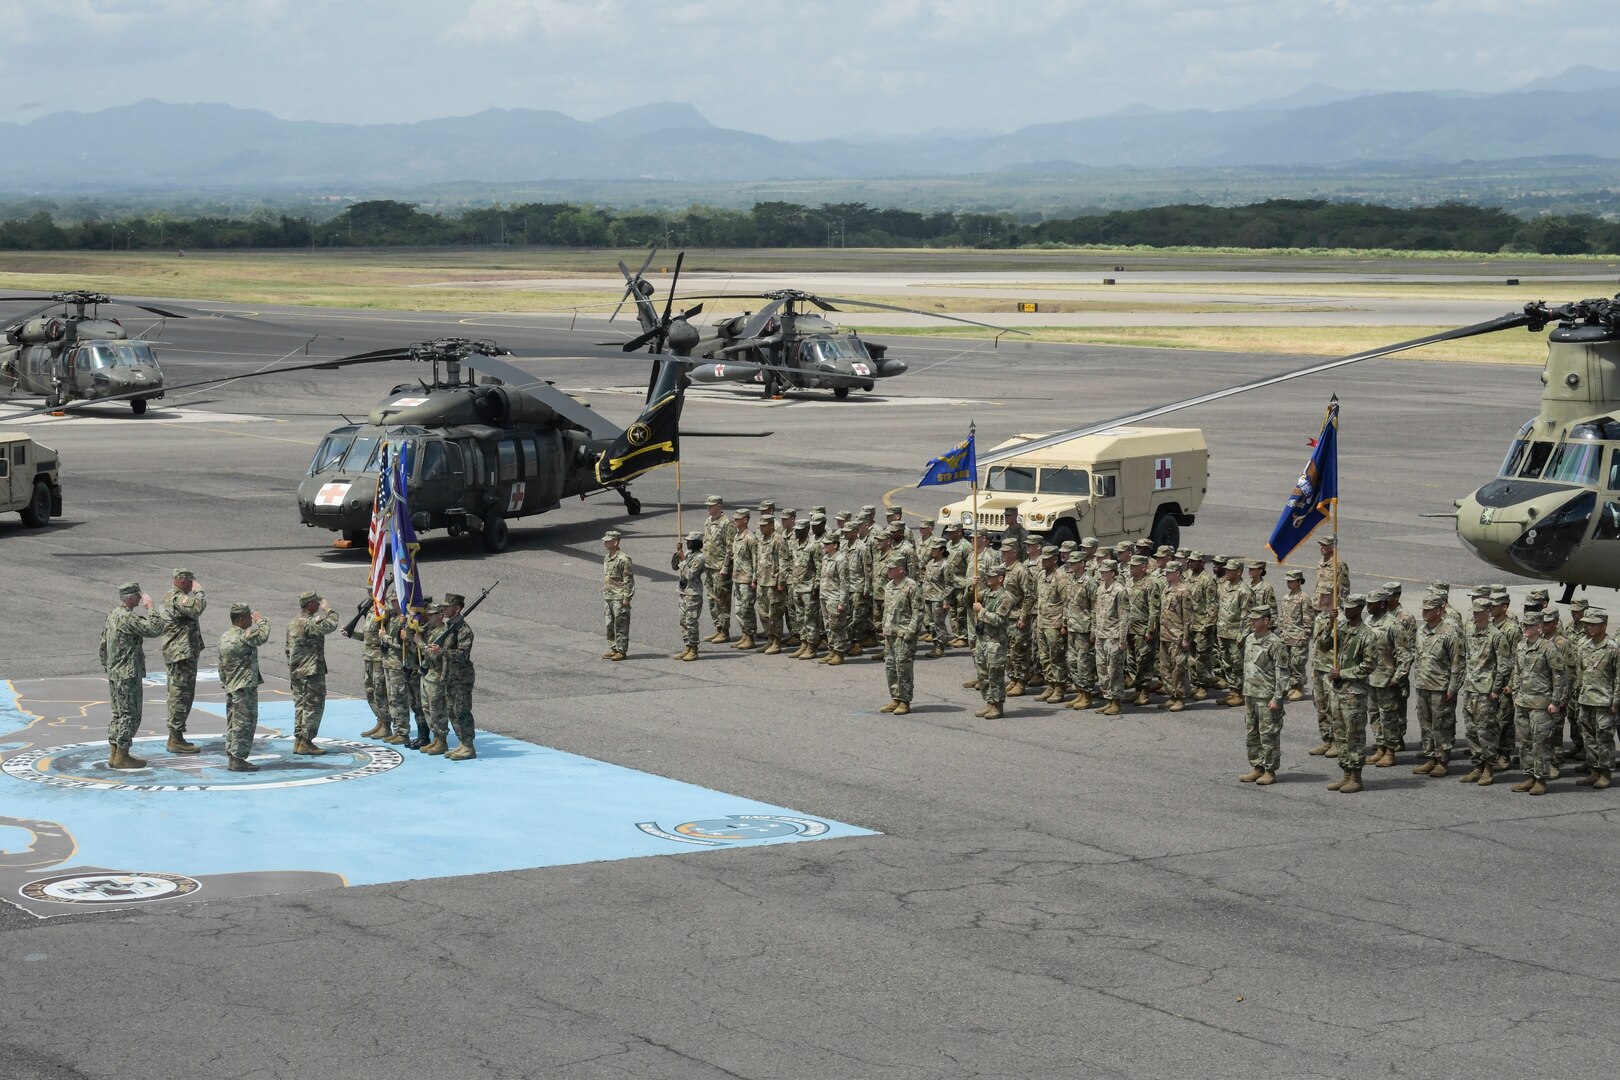 New Leader Assumes Command of JTF-Bravo > U.S. Southern Command > News